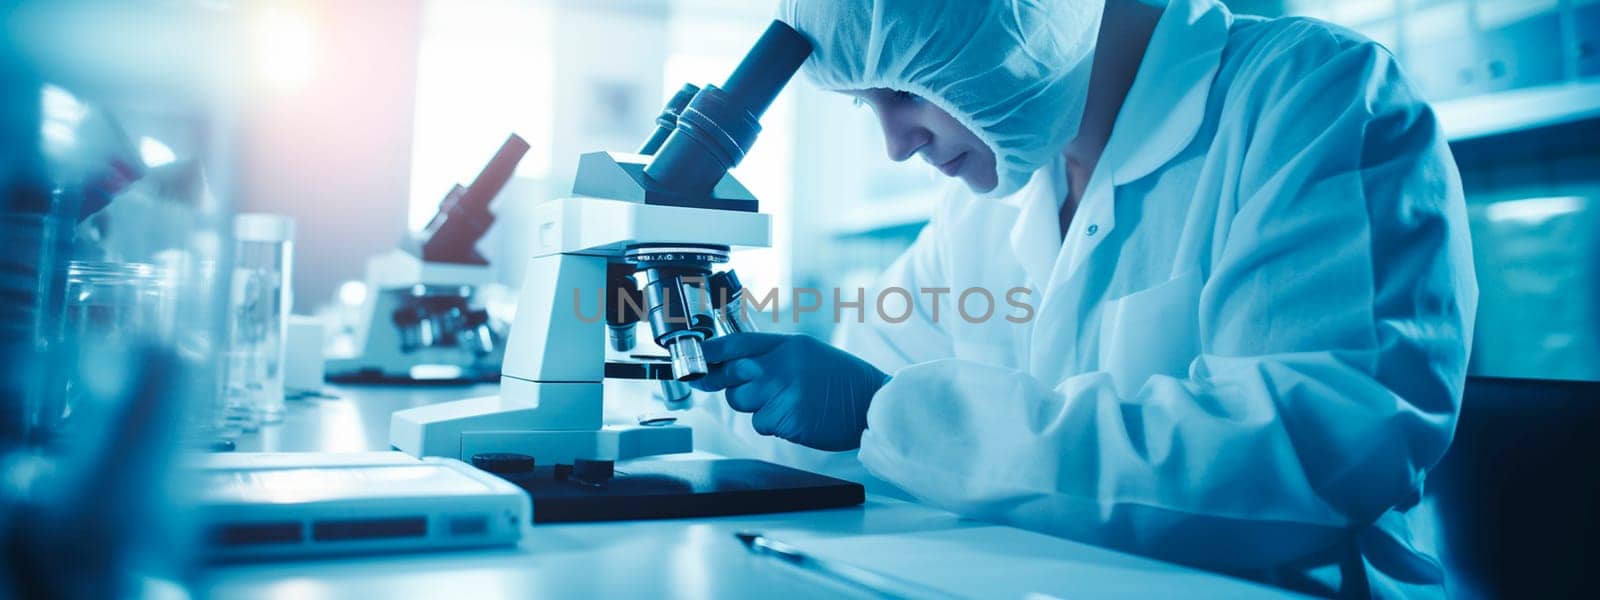 A man in a laboratory looks through a microscope. Selective focus. people.